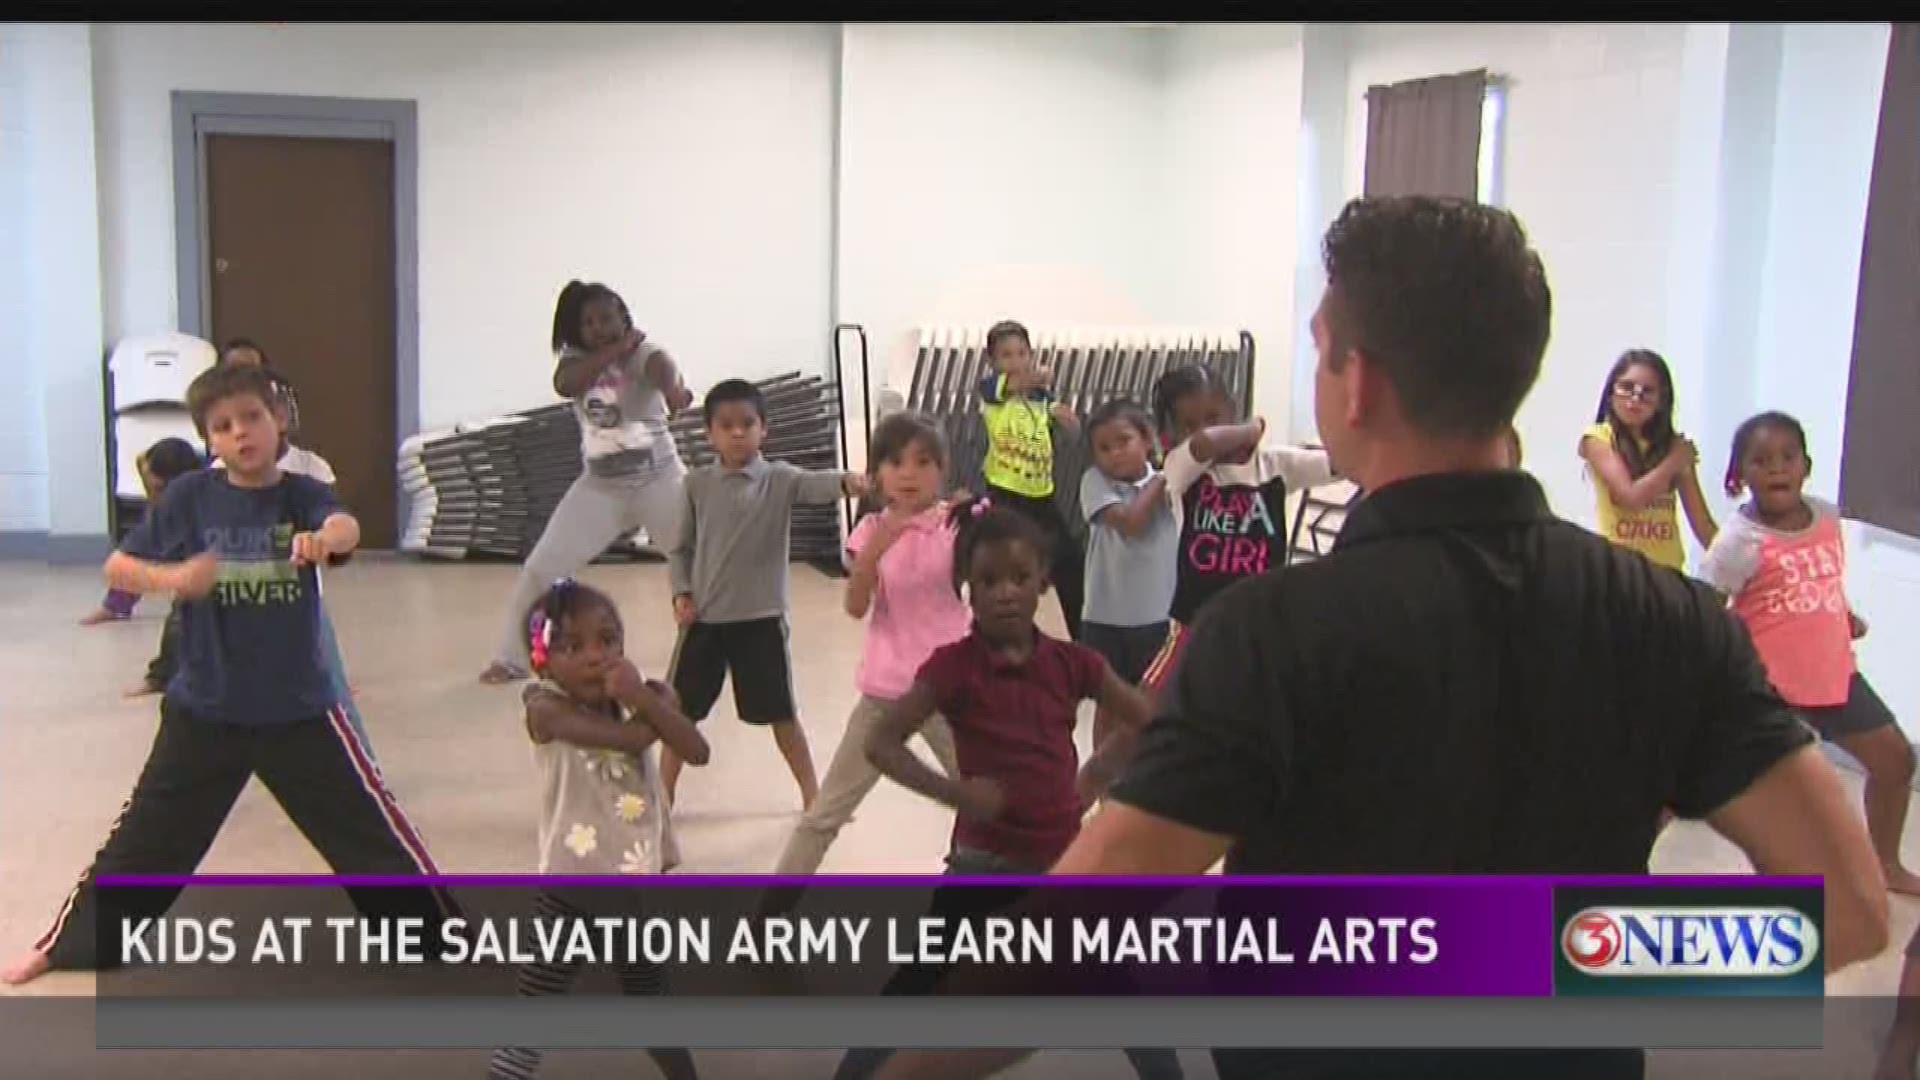 The kids at the Salvation Army are getting a special treat, learning martial arts at no cost to build a sense of self-esteem and stability. 